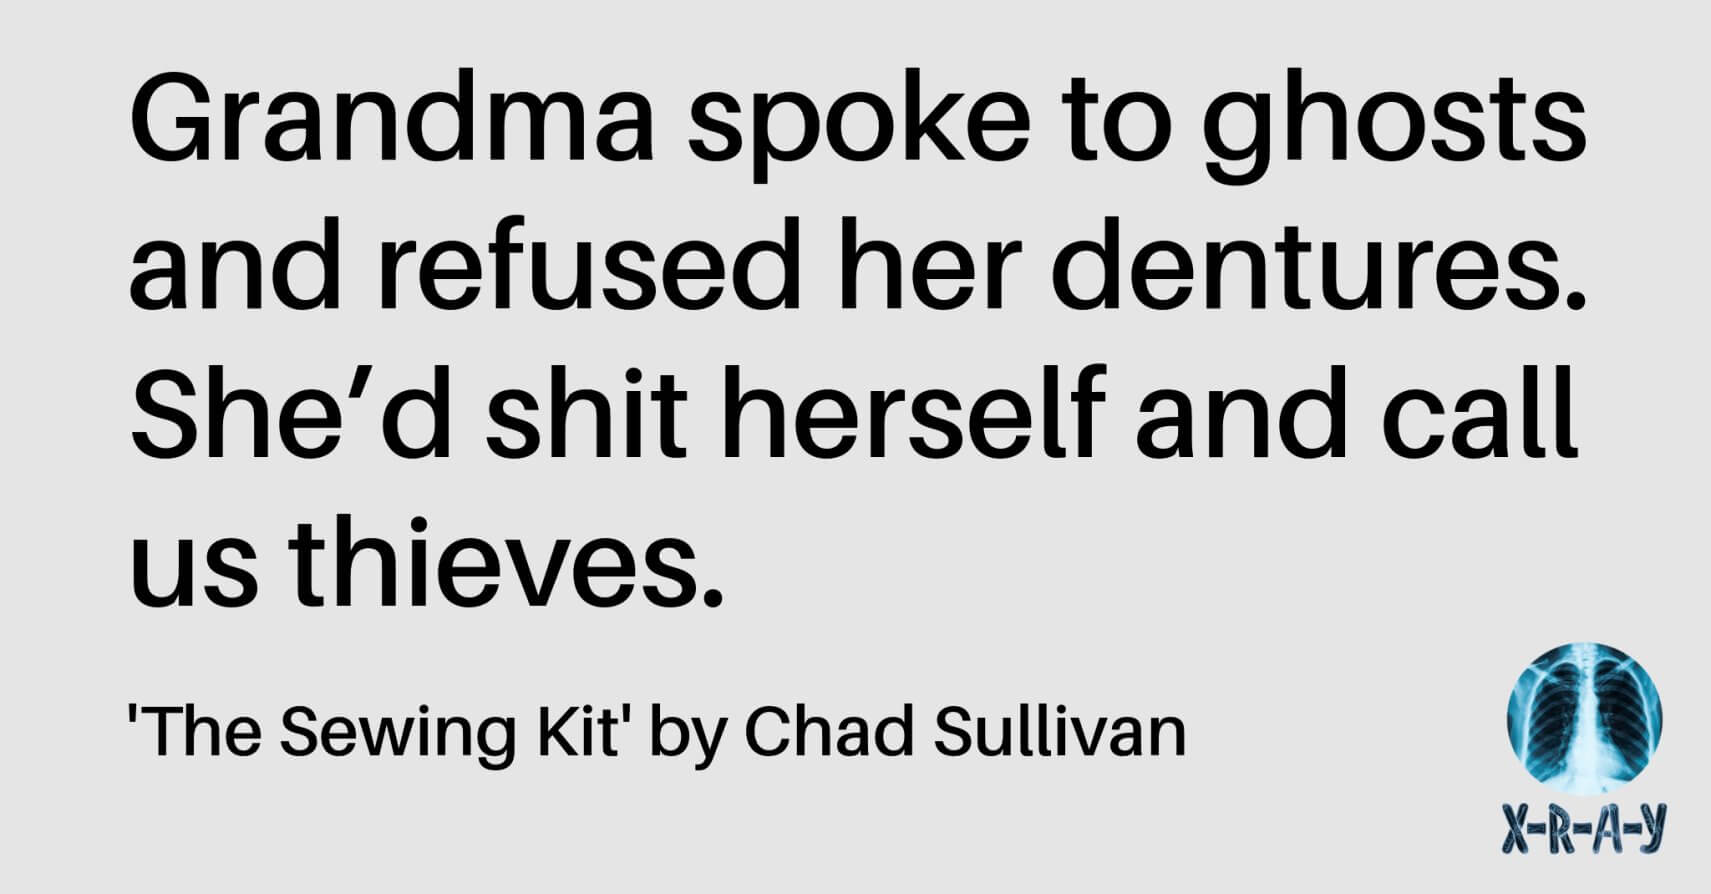 THE SEWING KIT by Chad Sullivan